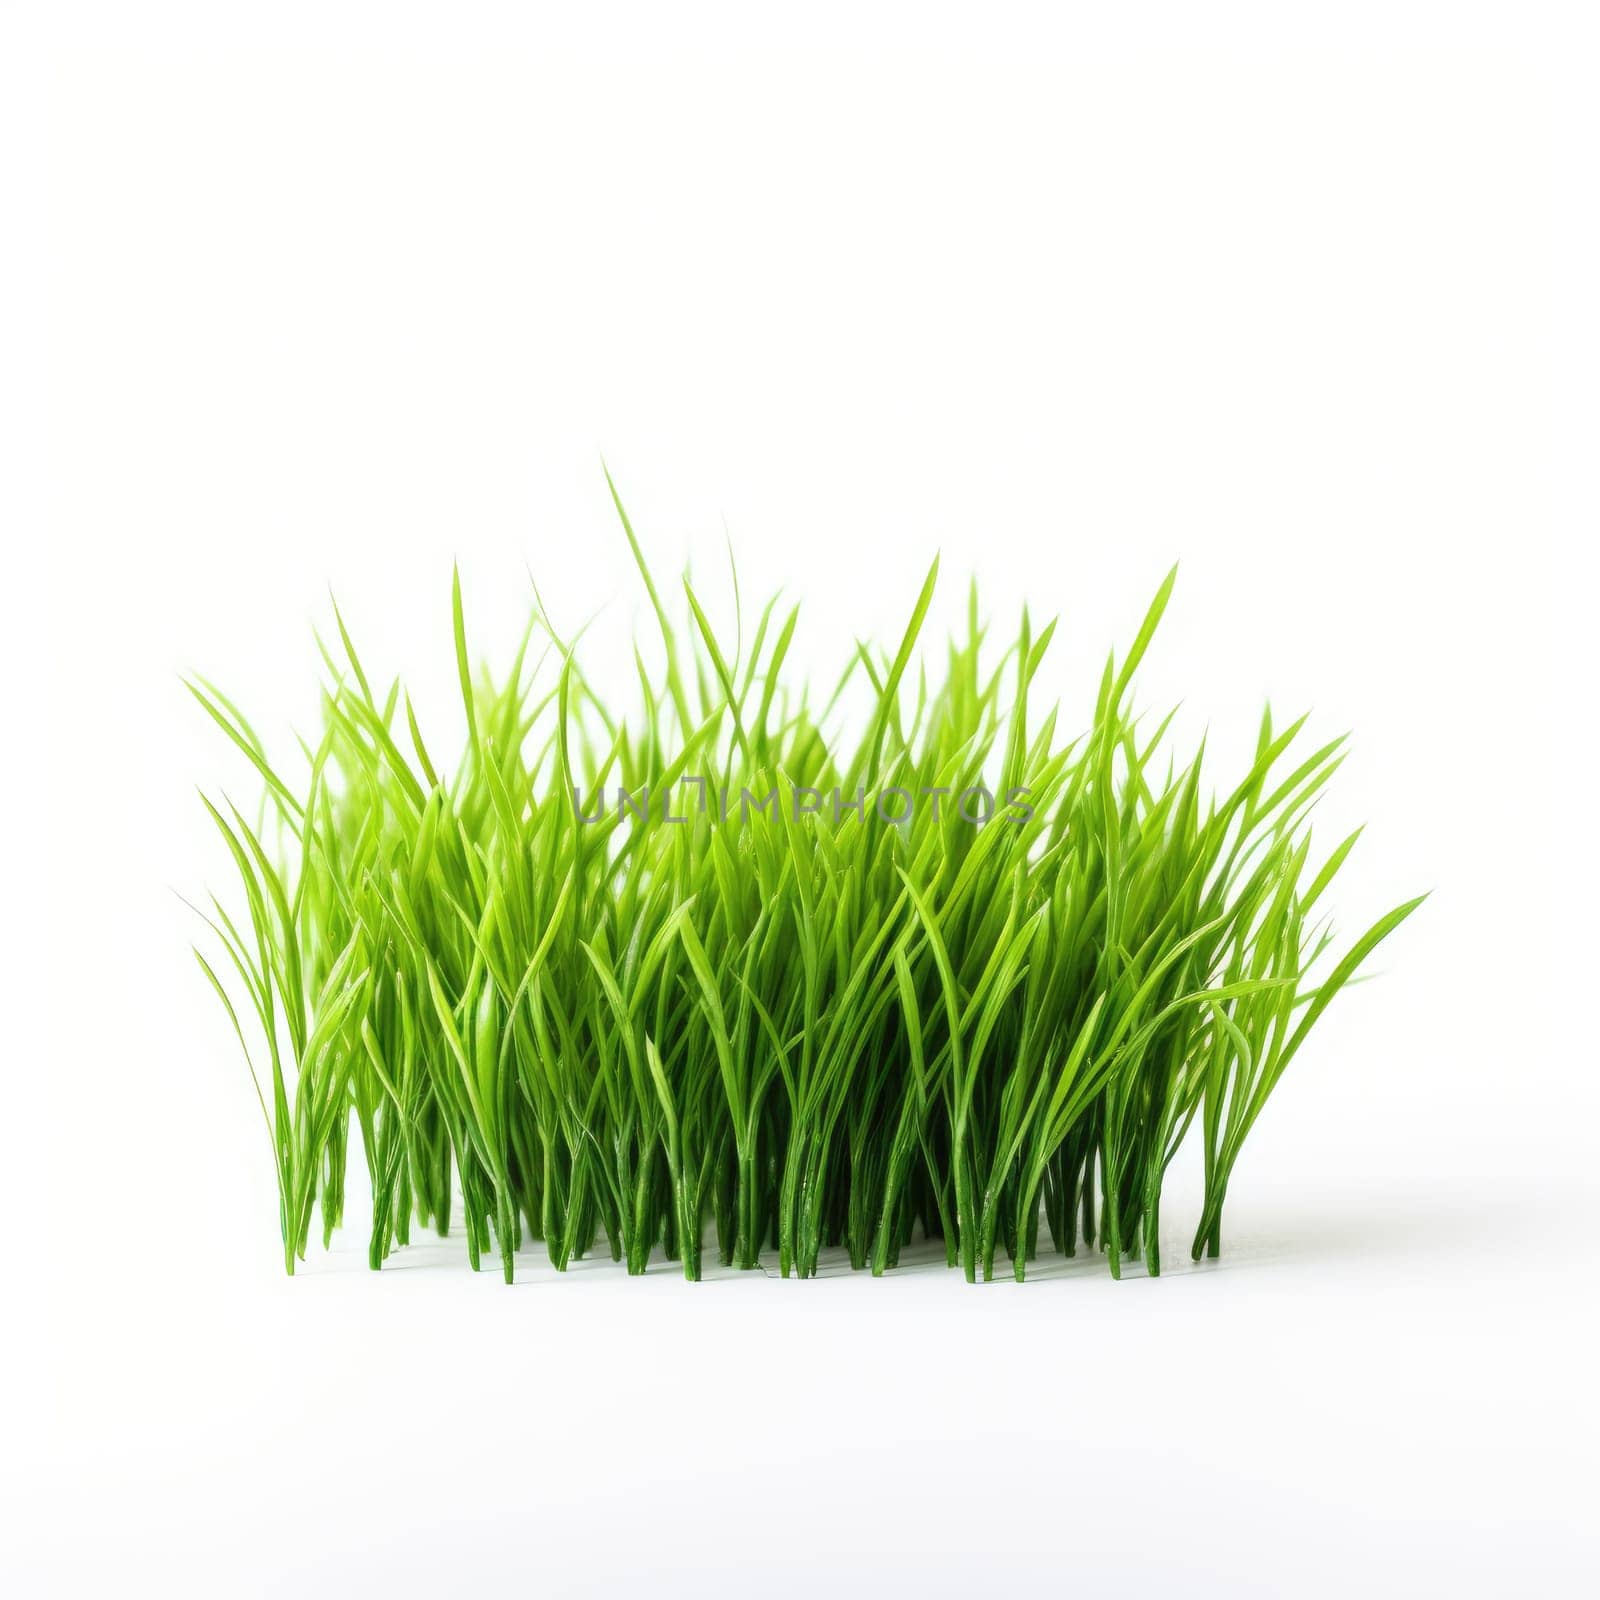 Isolated green grass on a white background by natali_brill